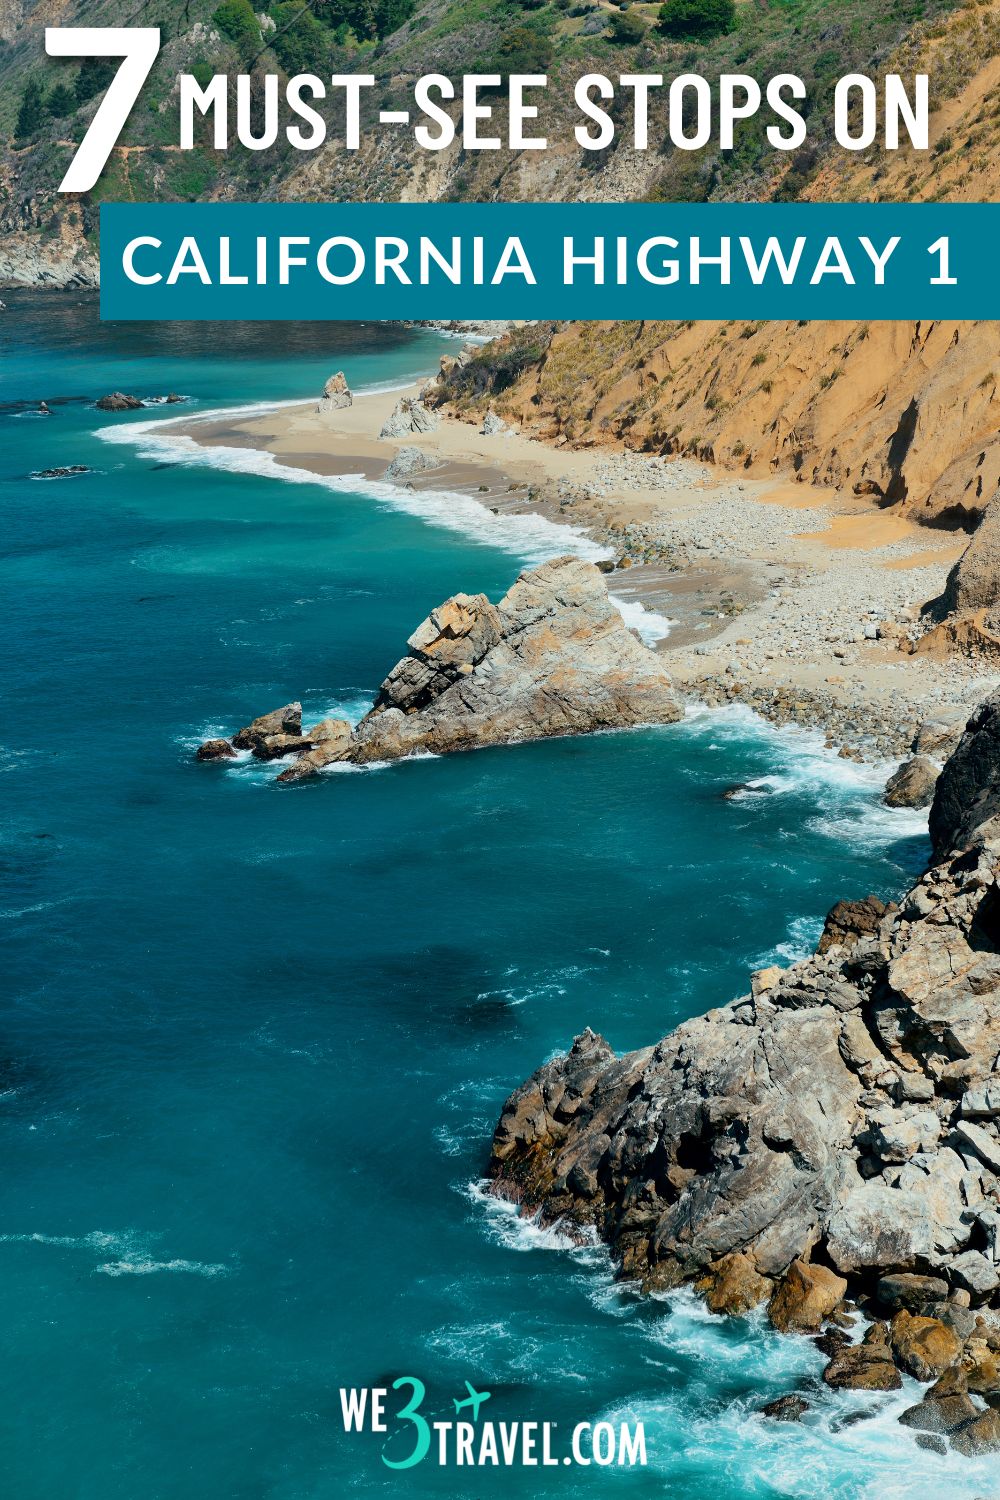 7 Must see stops on California Highway 1